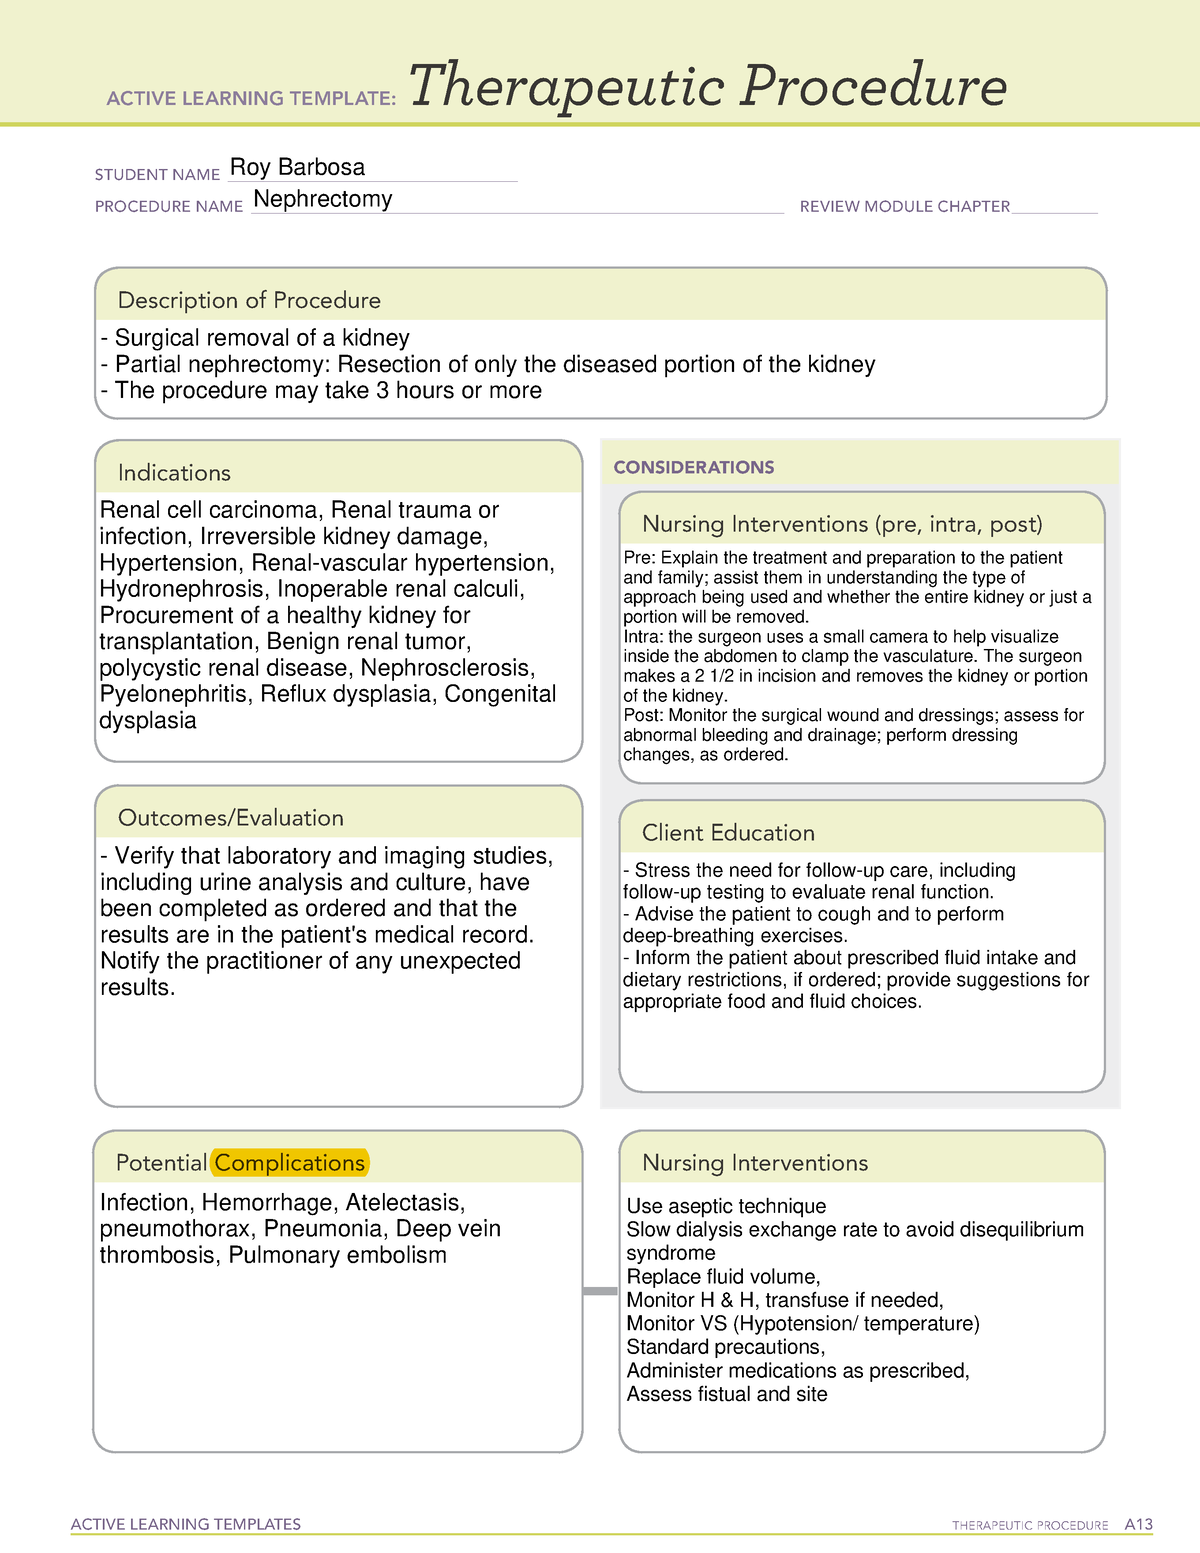 therapeutic-treatment-for-patient-active-learning-templates